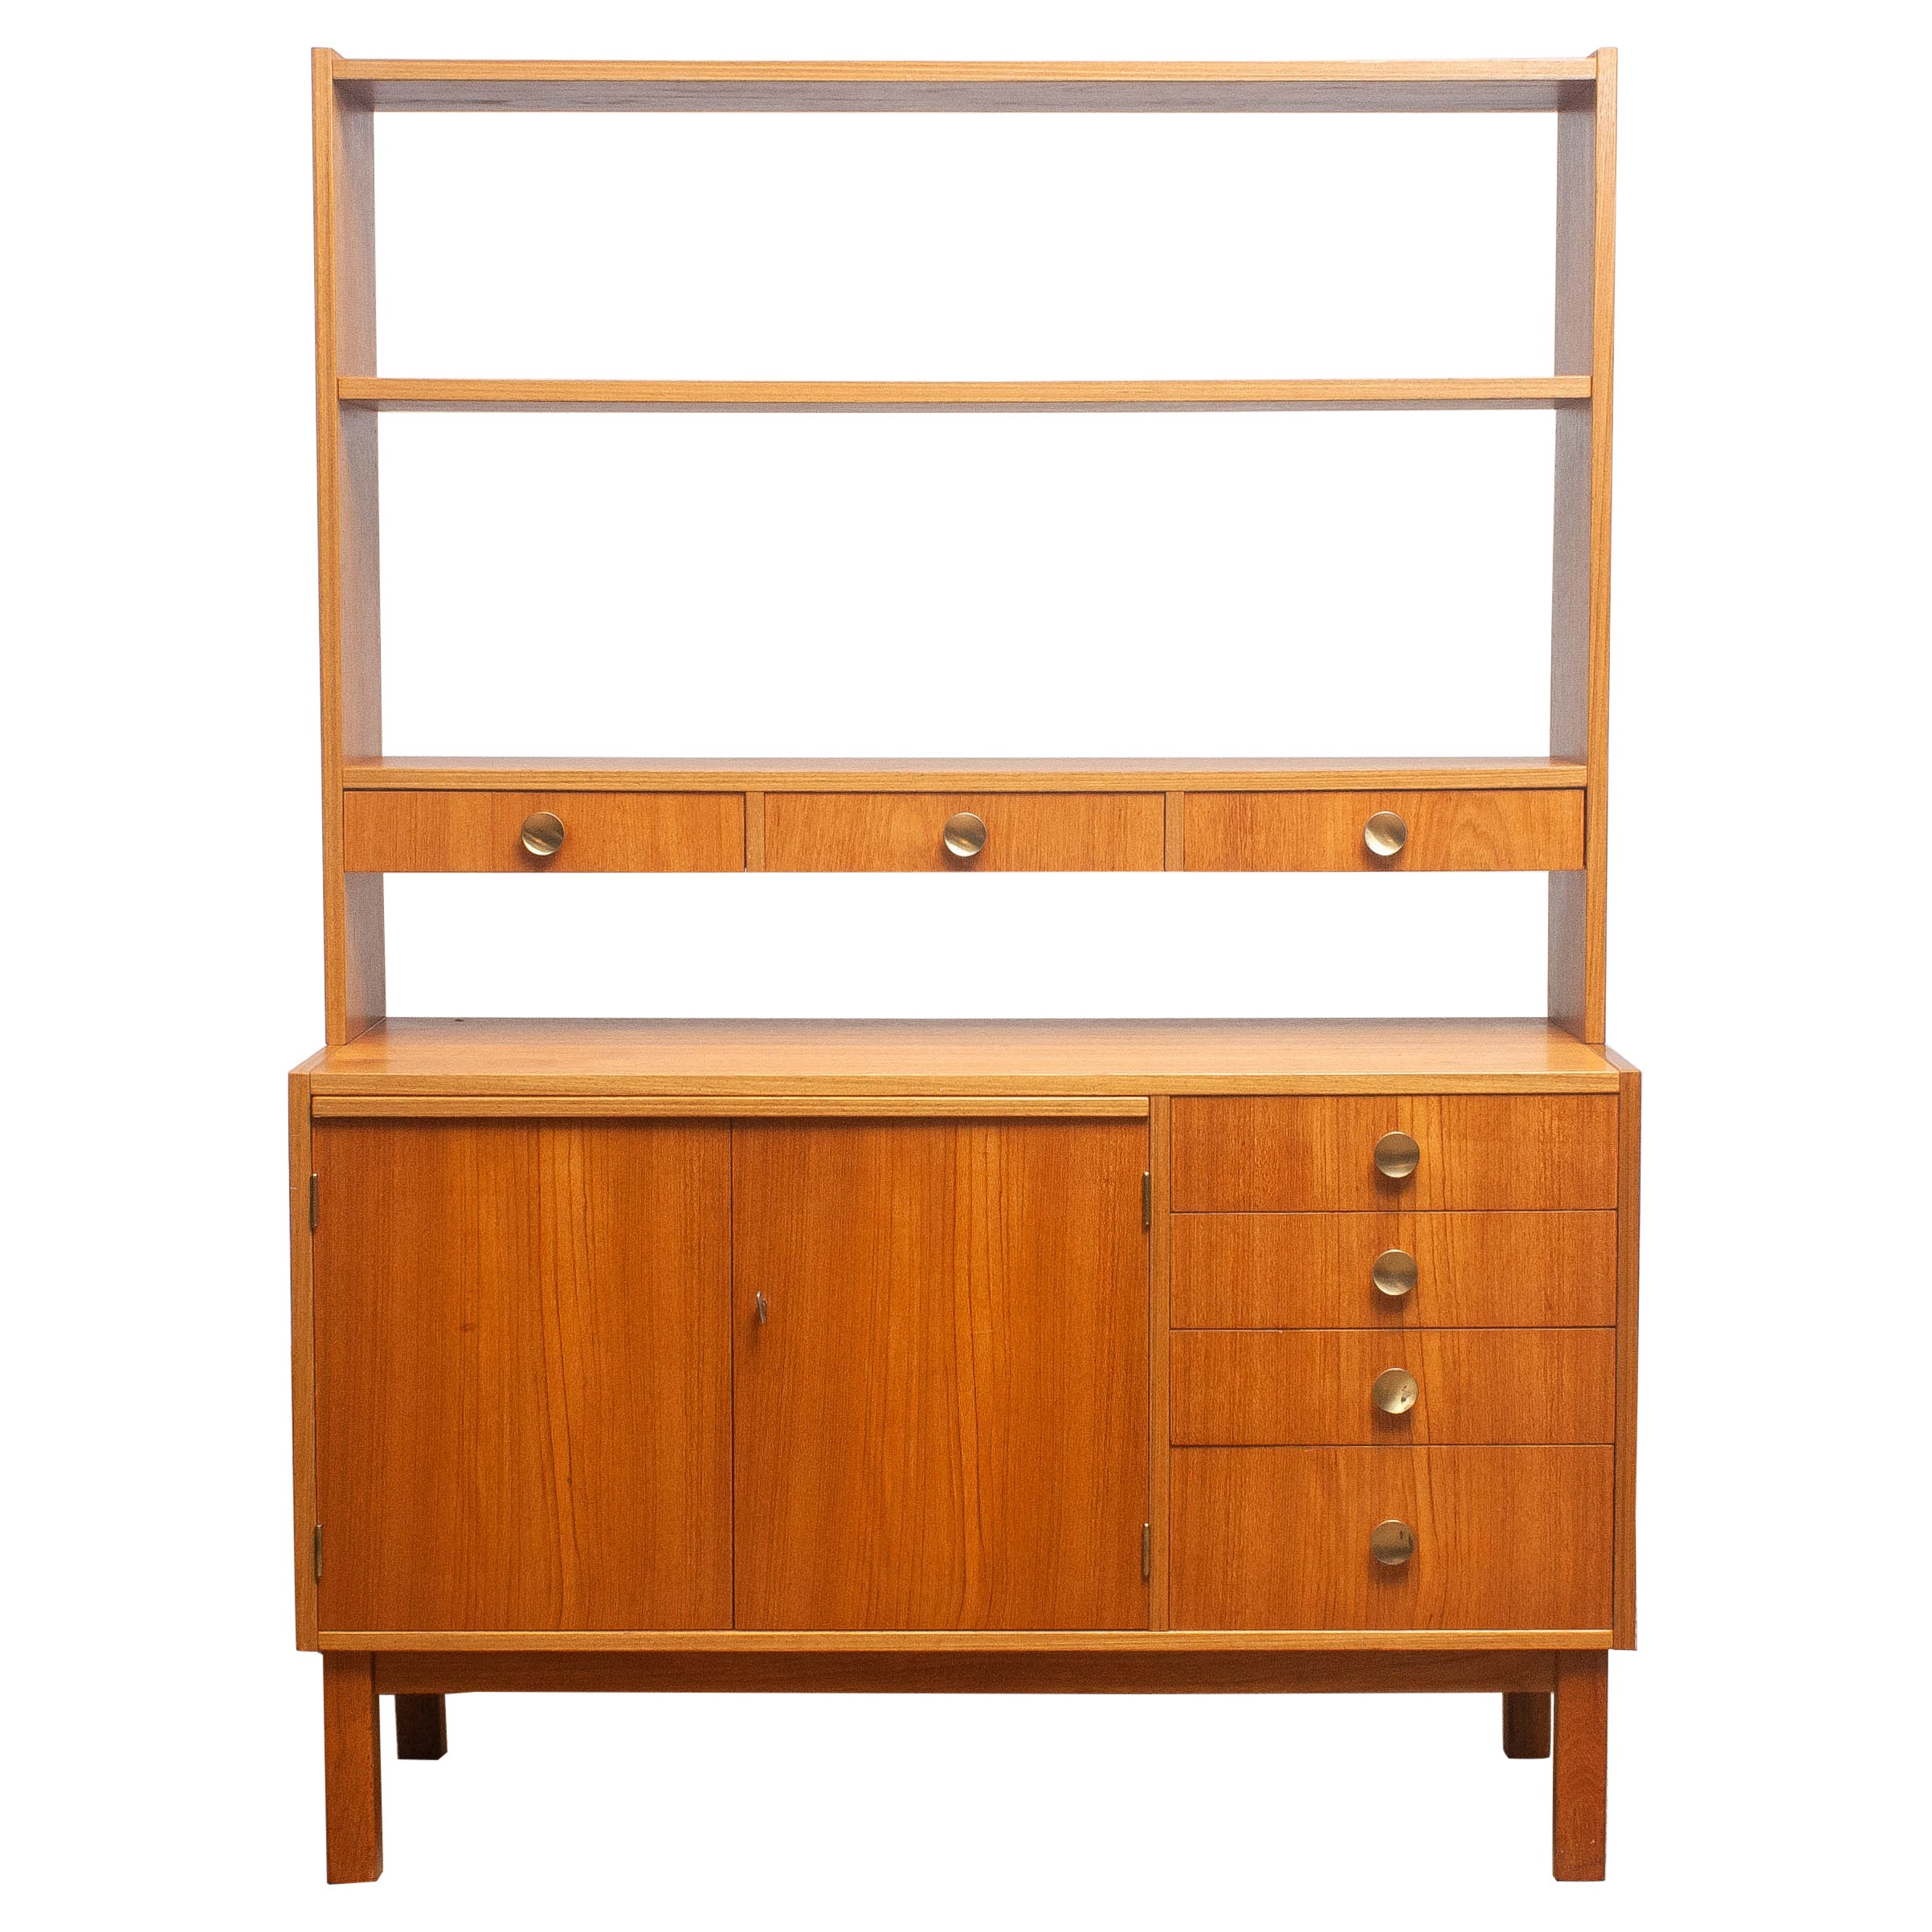 1950s Teak Veneer and Brass Bookshelves Cabinet with Writing Space from Sweden